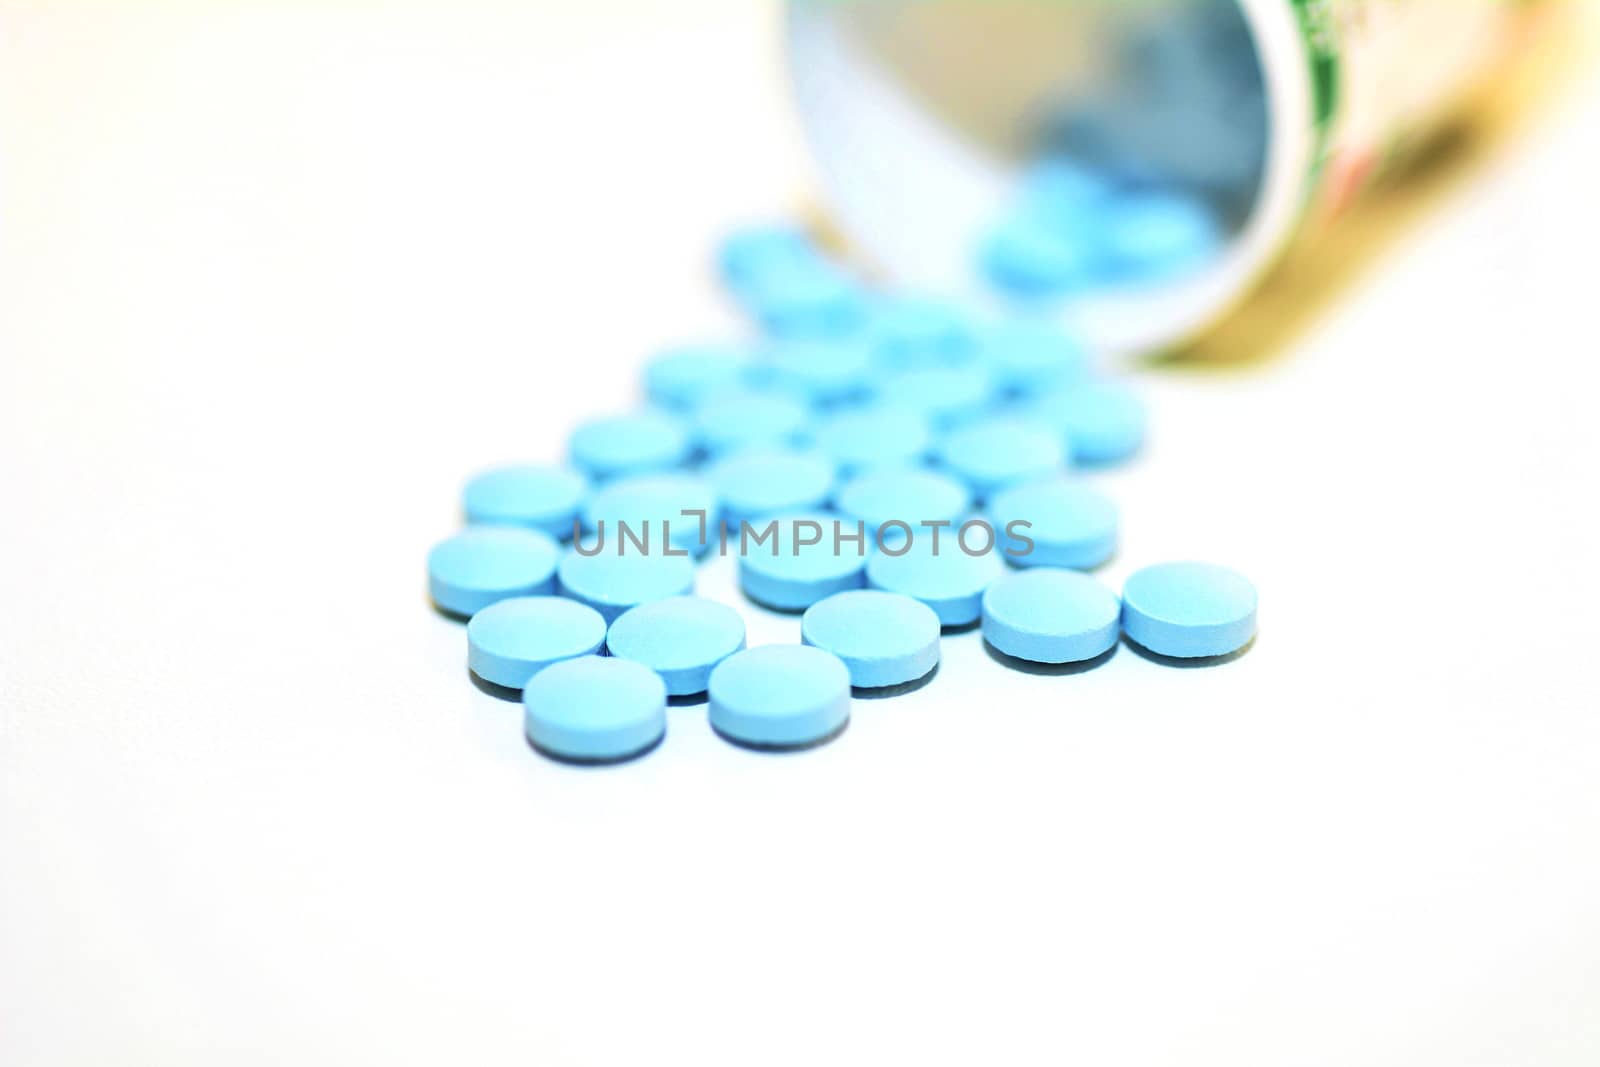 Closeup of a Blue Drug Pills Spilling Out of a Bottle on the White Background.